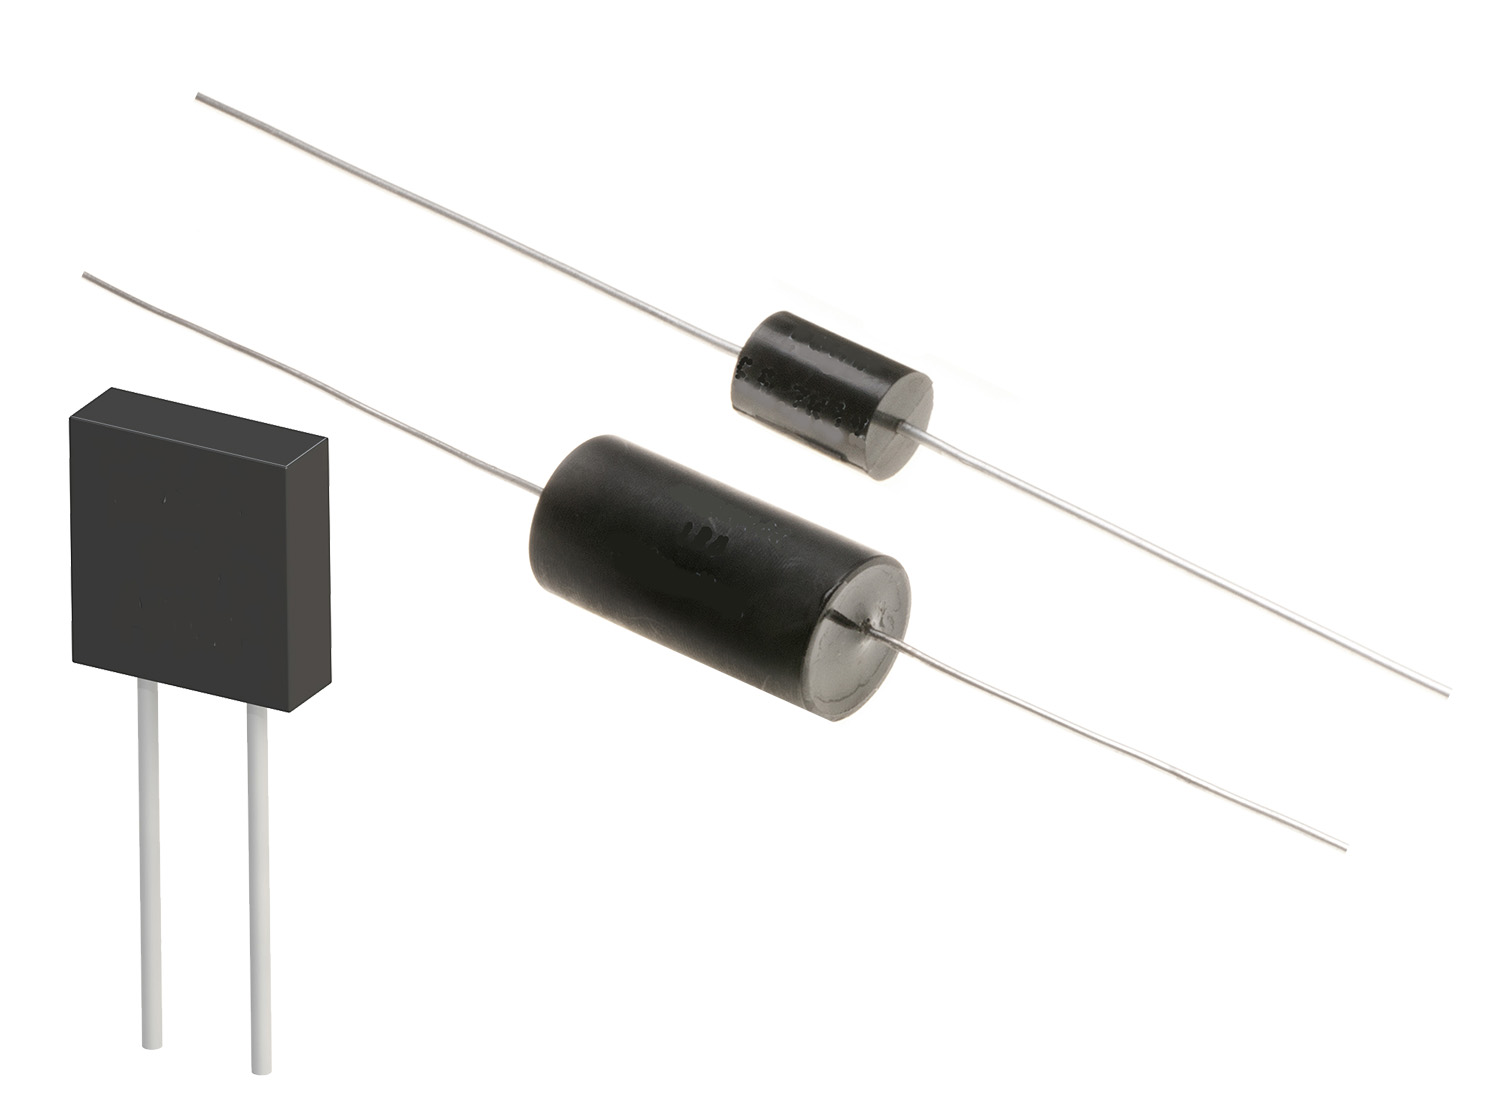 Riedon Reveals new Temperature Sensing and Control Solutions